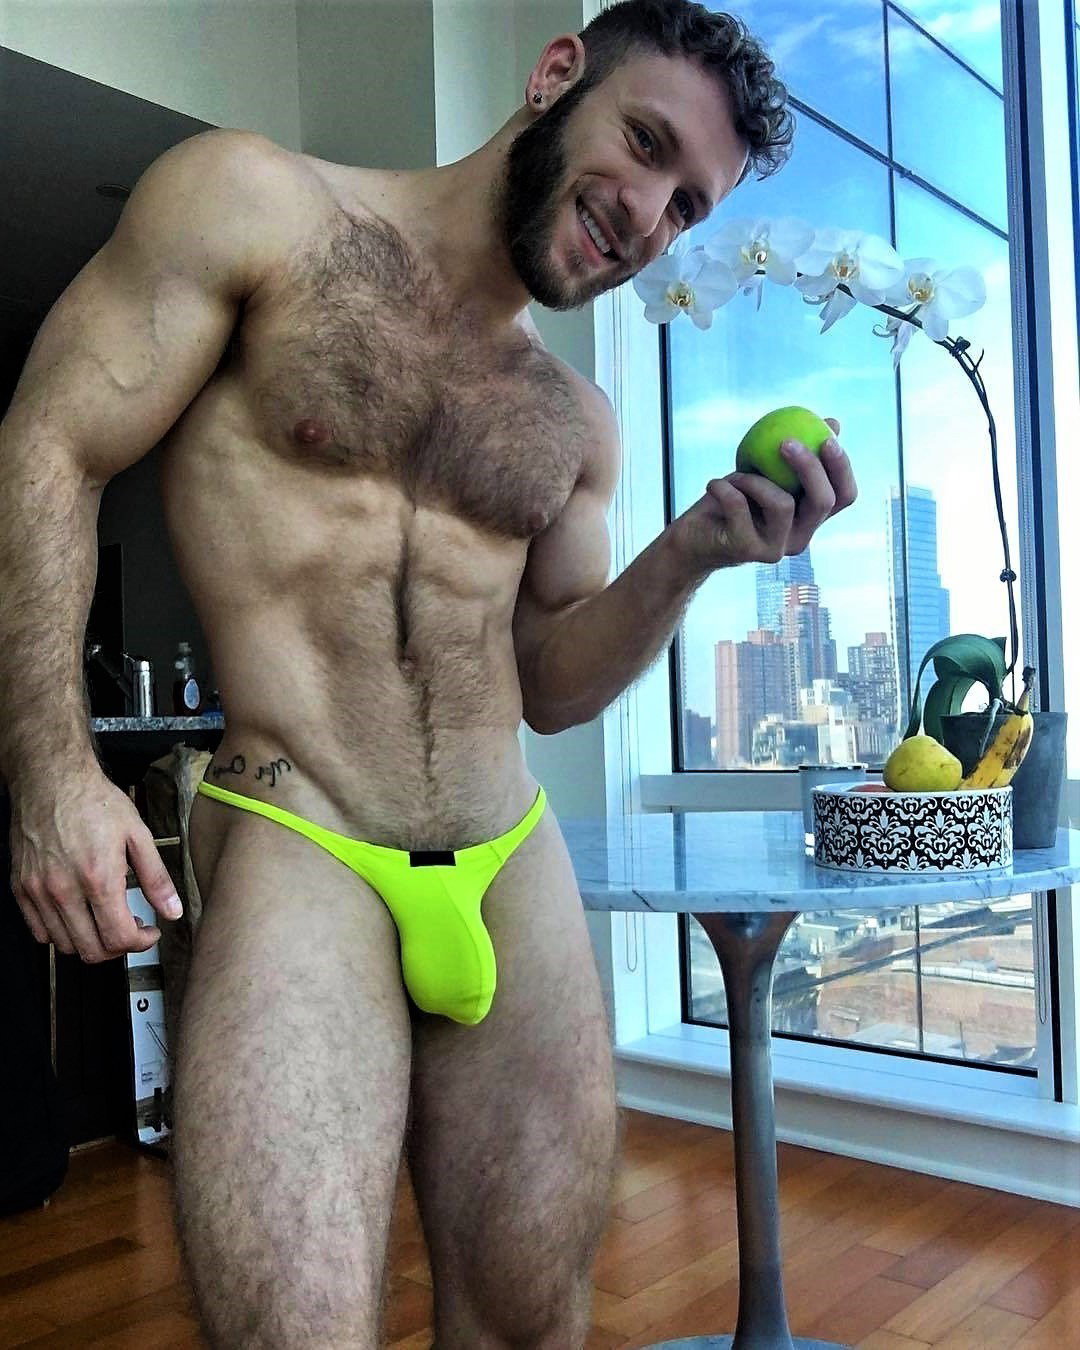 Photo by Smitty with the username @Resol702,  February 3, 2019 at 7:20 PM. The post is about the topic Gay Hairy Men